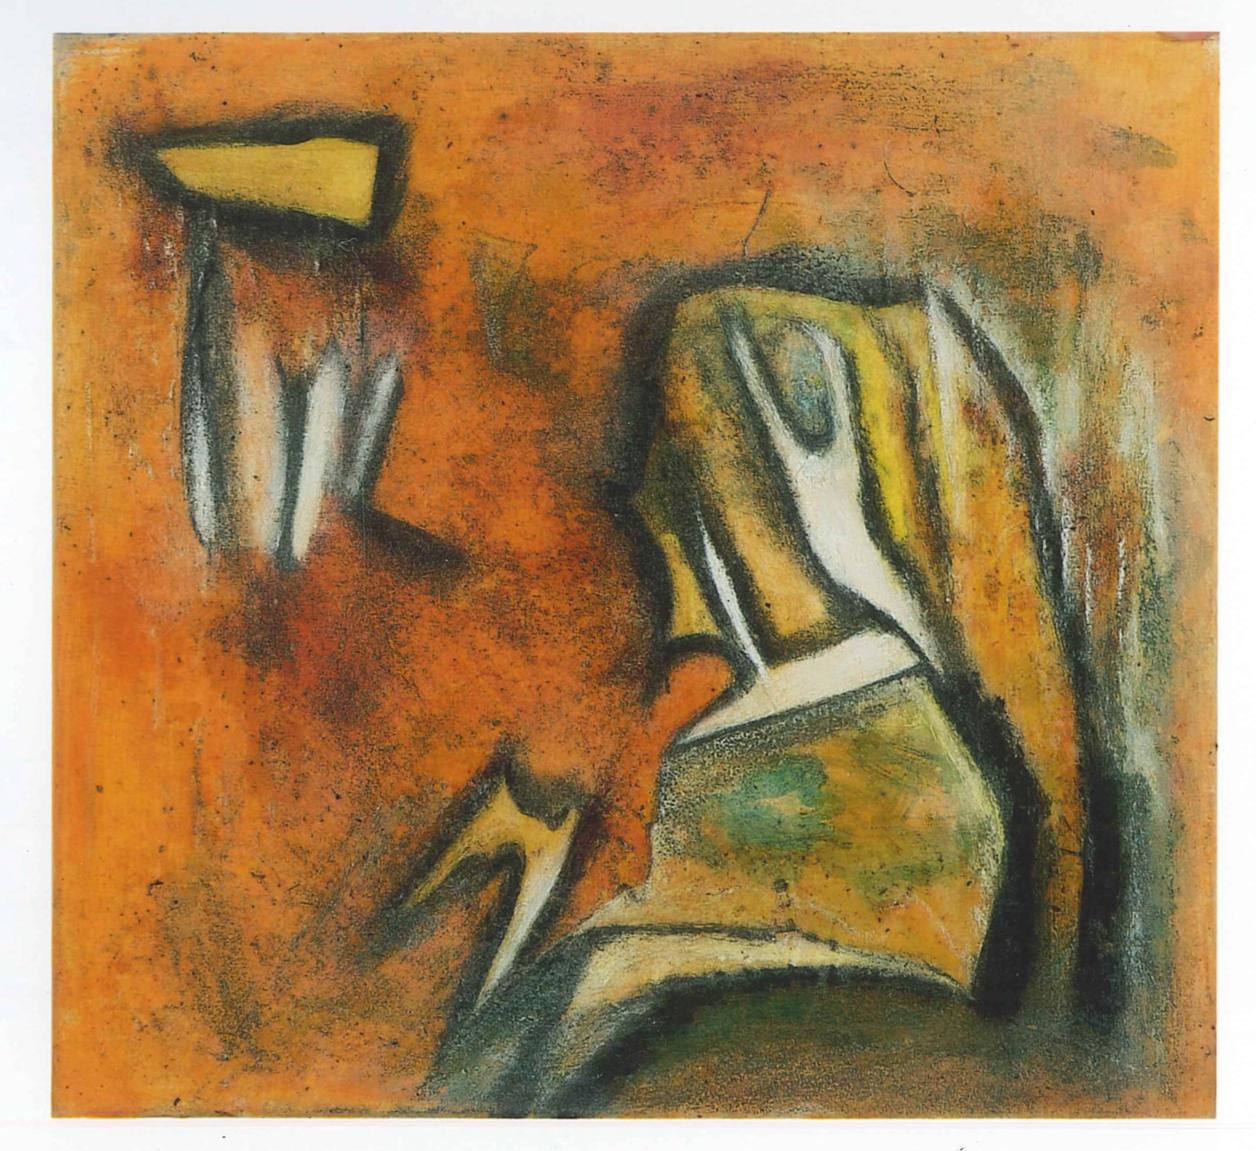 Saracen Head is an original artwork realized by Giorgio Lo Fermo in 2013.

Oil on canvas.

This contemporary painting represents an abstract composition. The scene is characterized by
tones of brown and ocher.

Giorgio Lo Fermo is an Italian painter